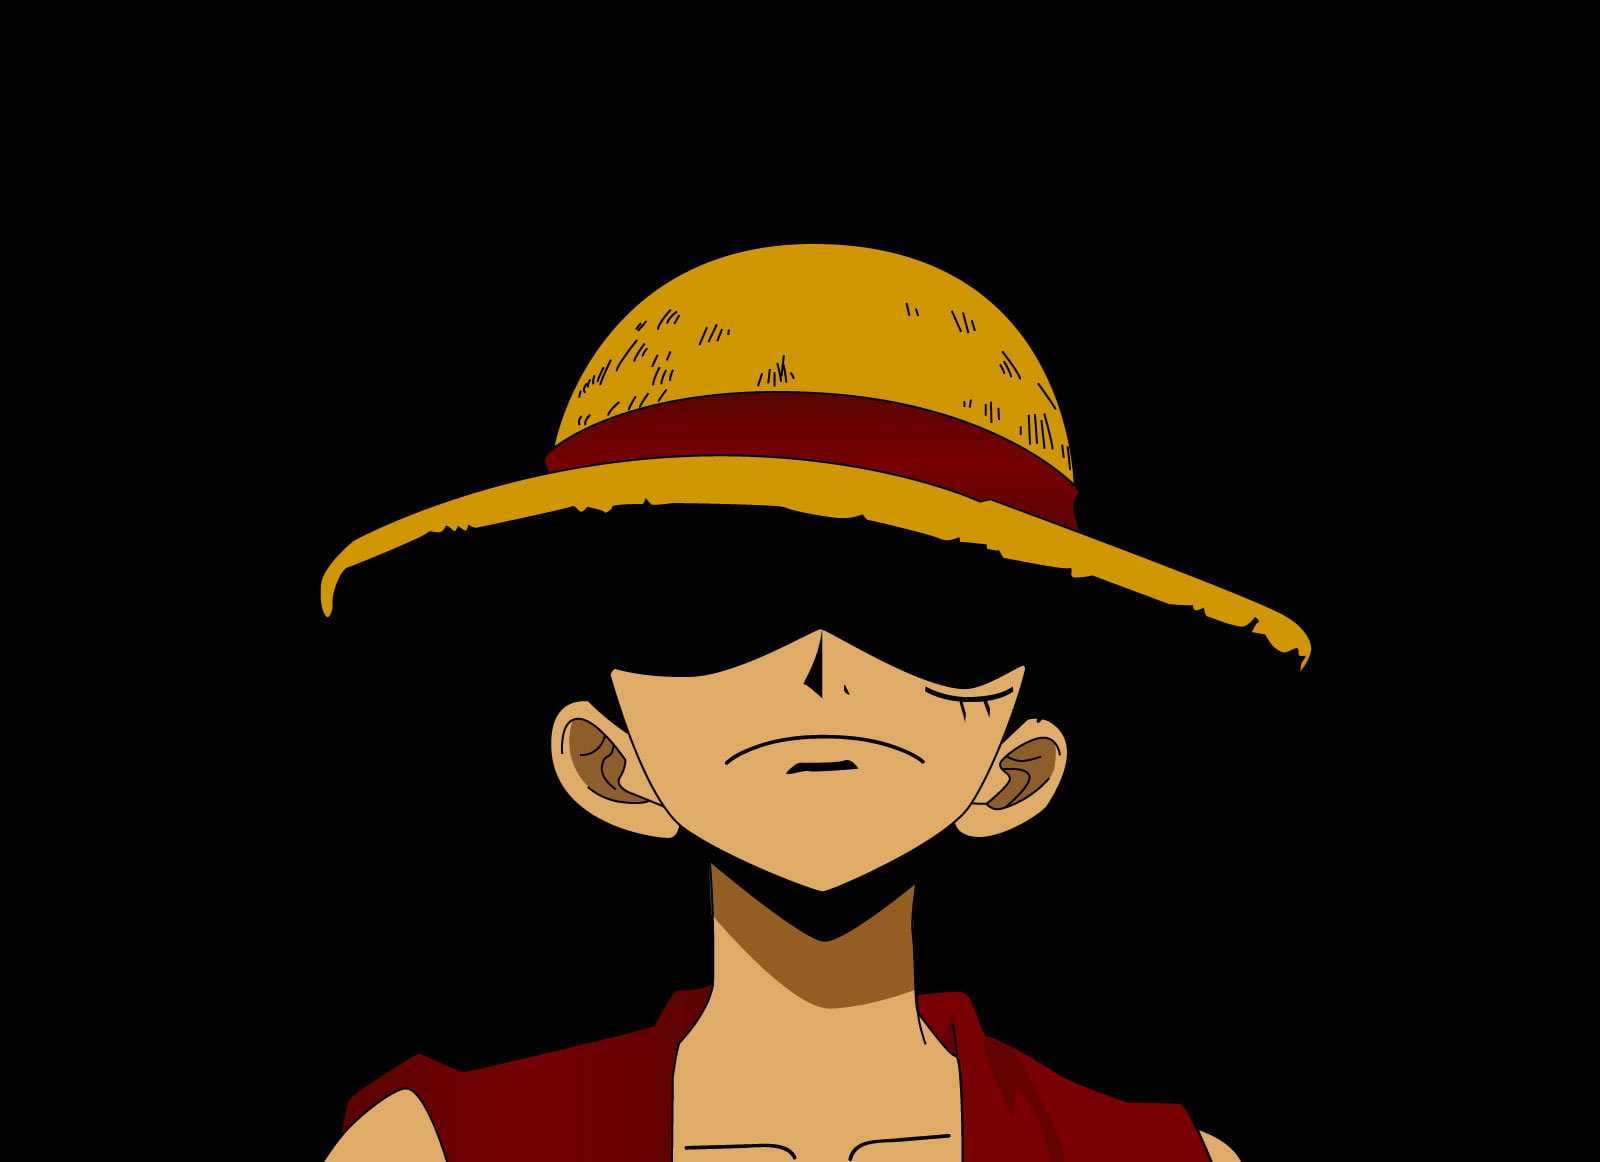 Monkey D. Luffy wallpaper, One Piece, anime, one person, studio shot, indoors • Wallpaper For You HD Wallpaper For Desktop & Mobile